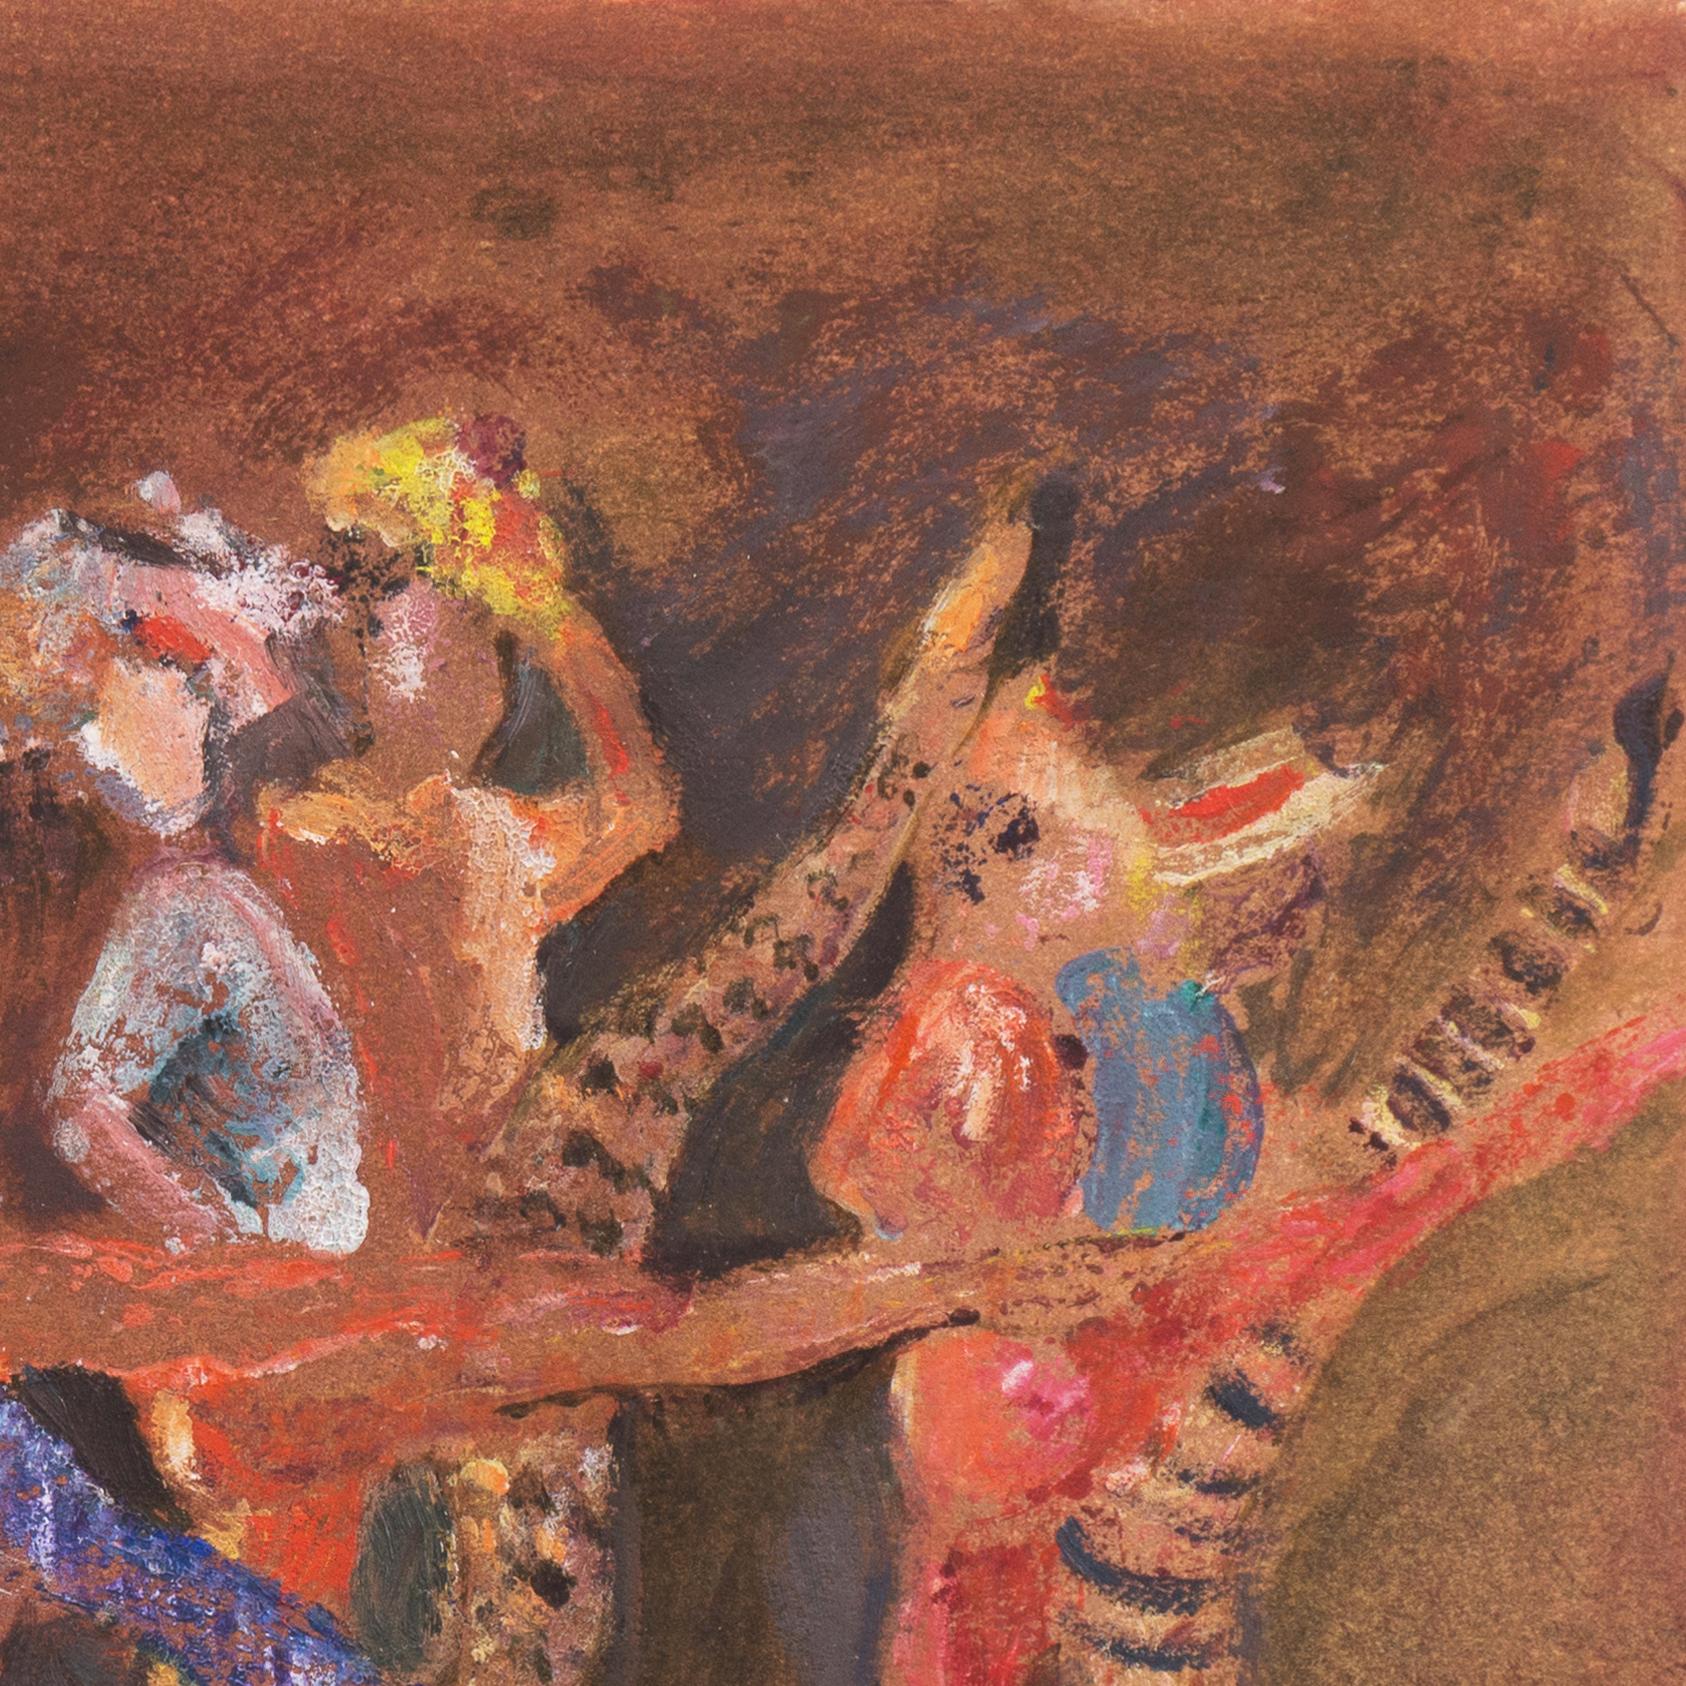 An energetic and dynamic figural work showing a parade of figures from the Commedia dell'arte marching in step.

Signed lower right, 'Liz Maxwell' (American, born 1936) and dated 1987.

This notable California artist lived in New York before